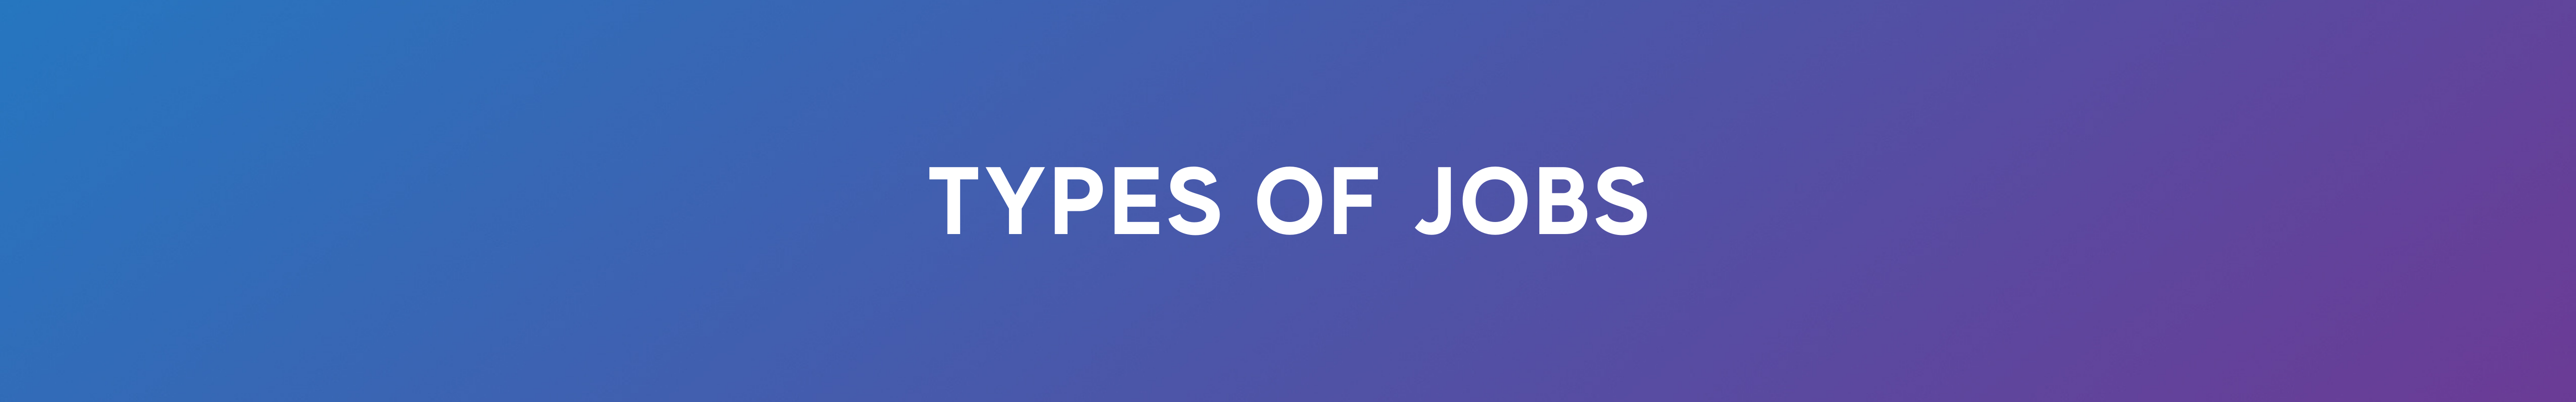 Types of Jobs Banner